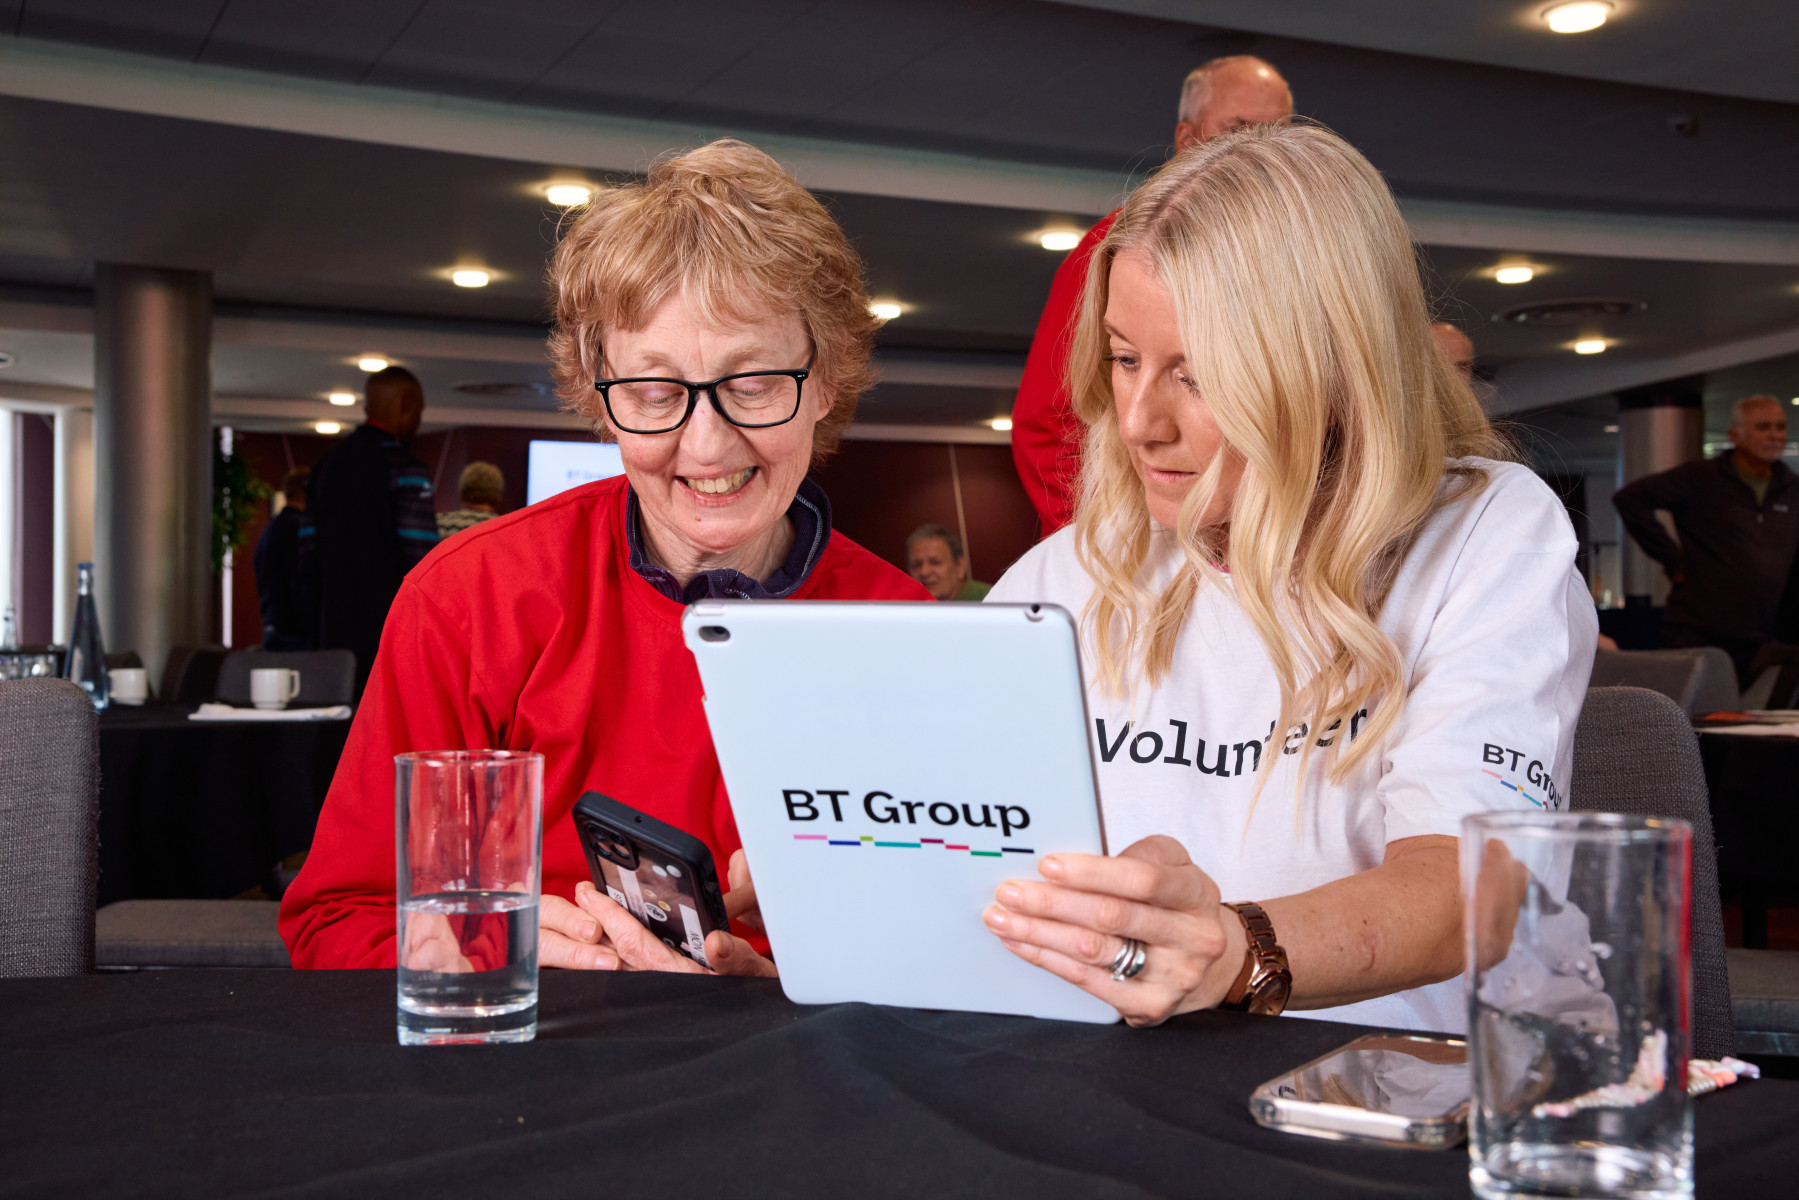 Volunteer and learner at a BT Group / AbilityNet event